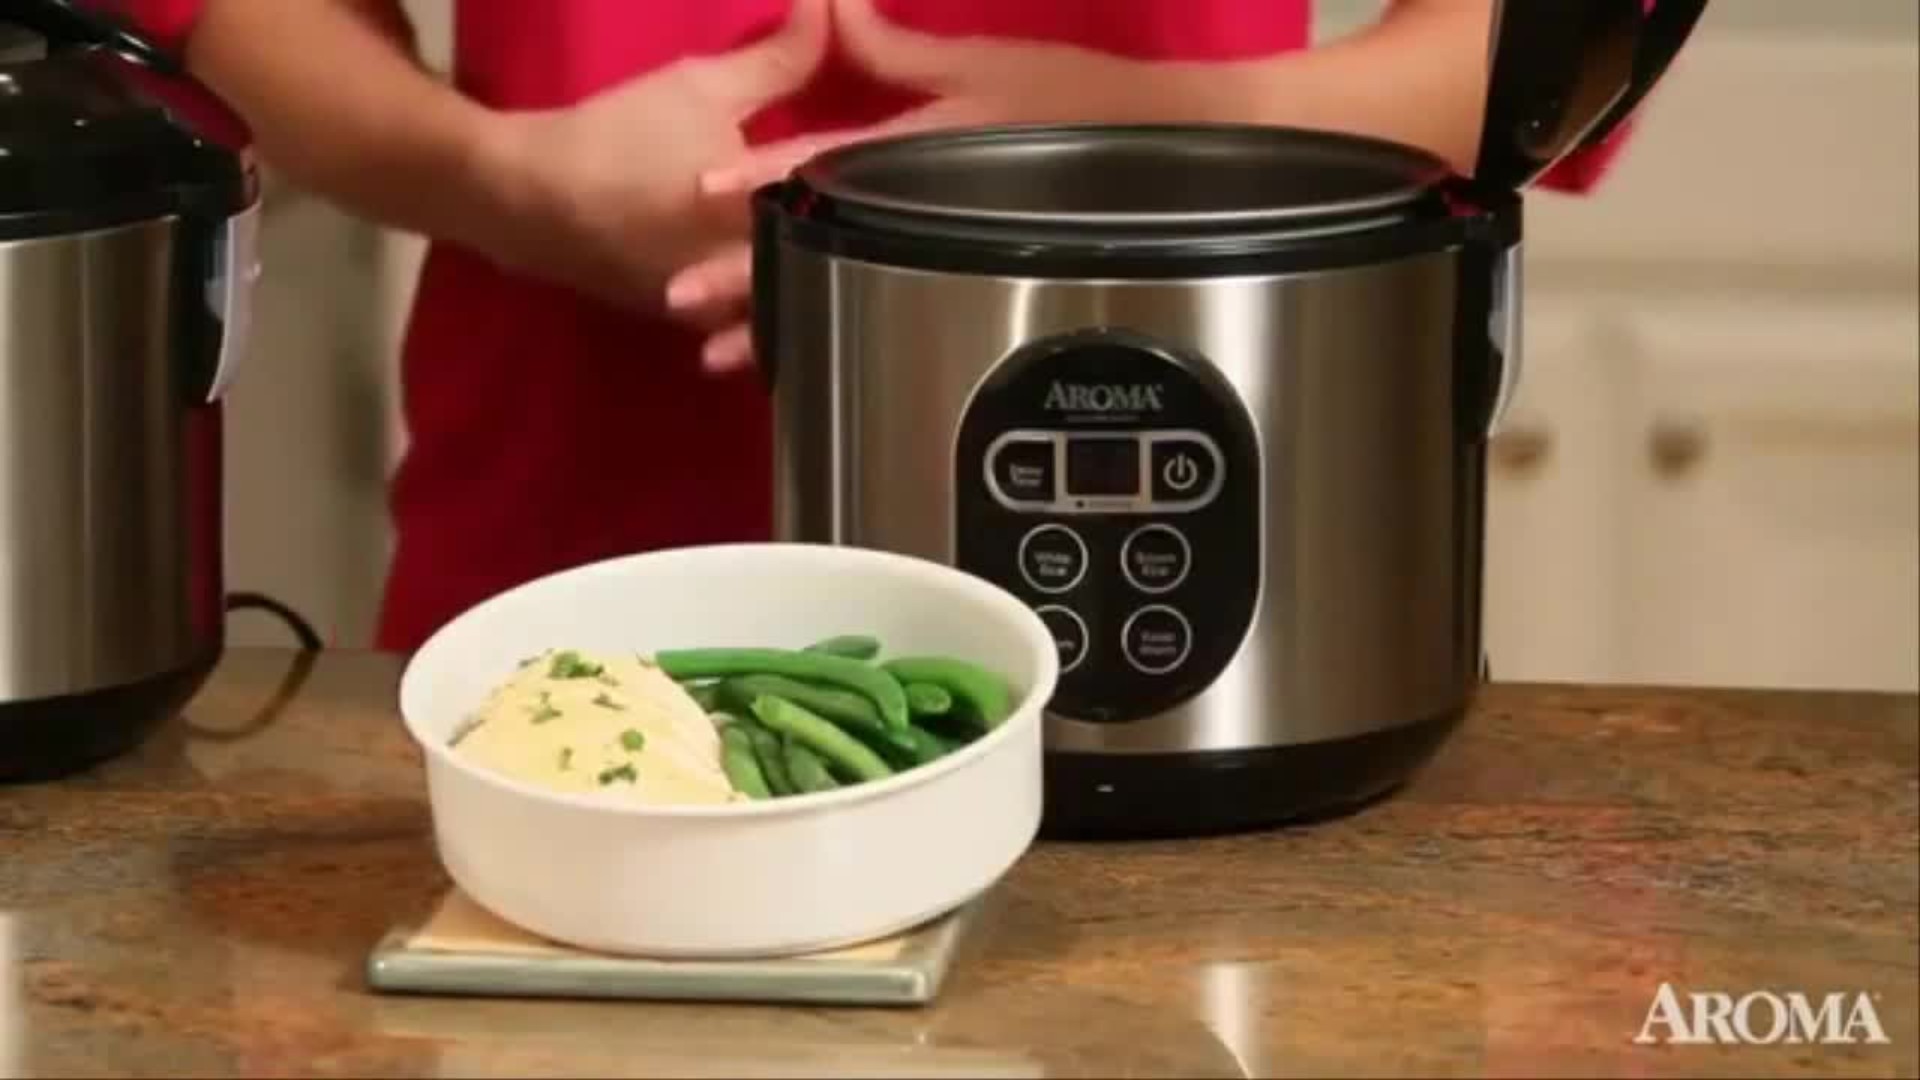 https://top10critic.com/wp-content/uploads/2018/10/Top-10-Aroma-Rice-Cooker-in-2019-1.jpg